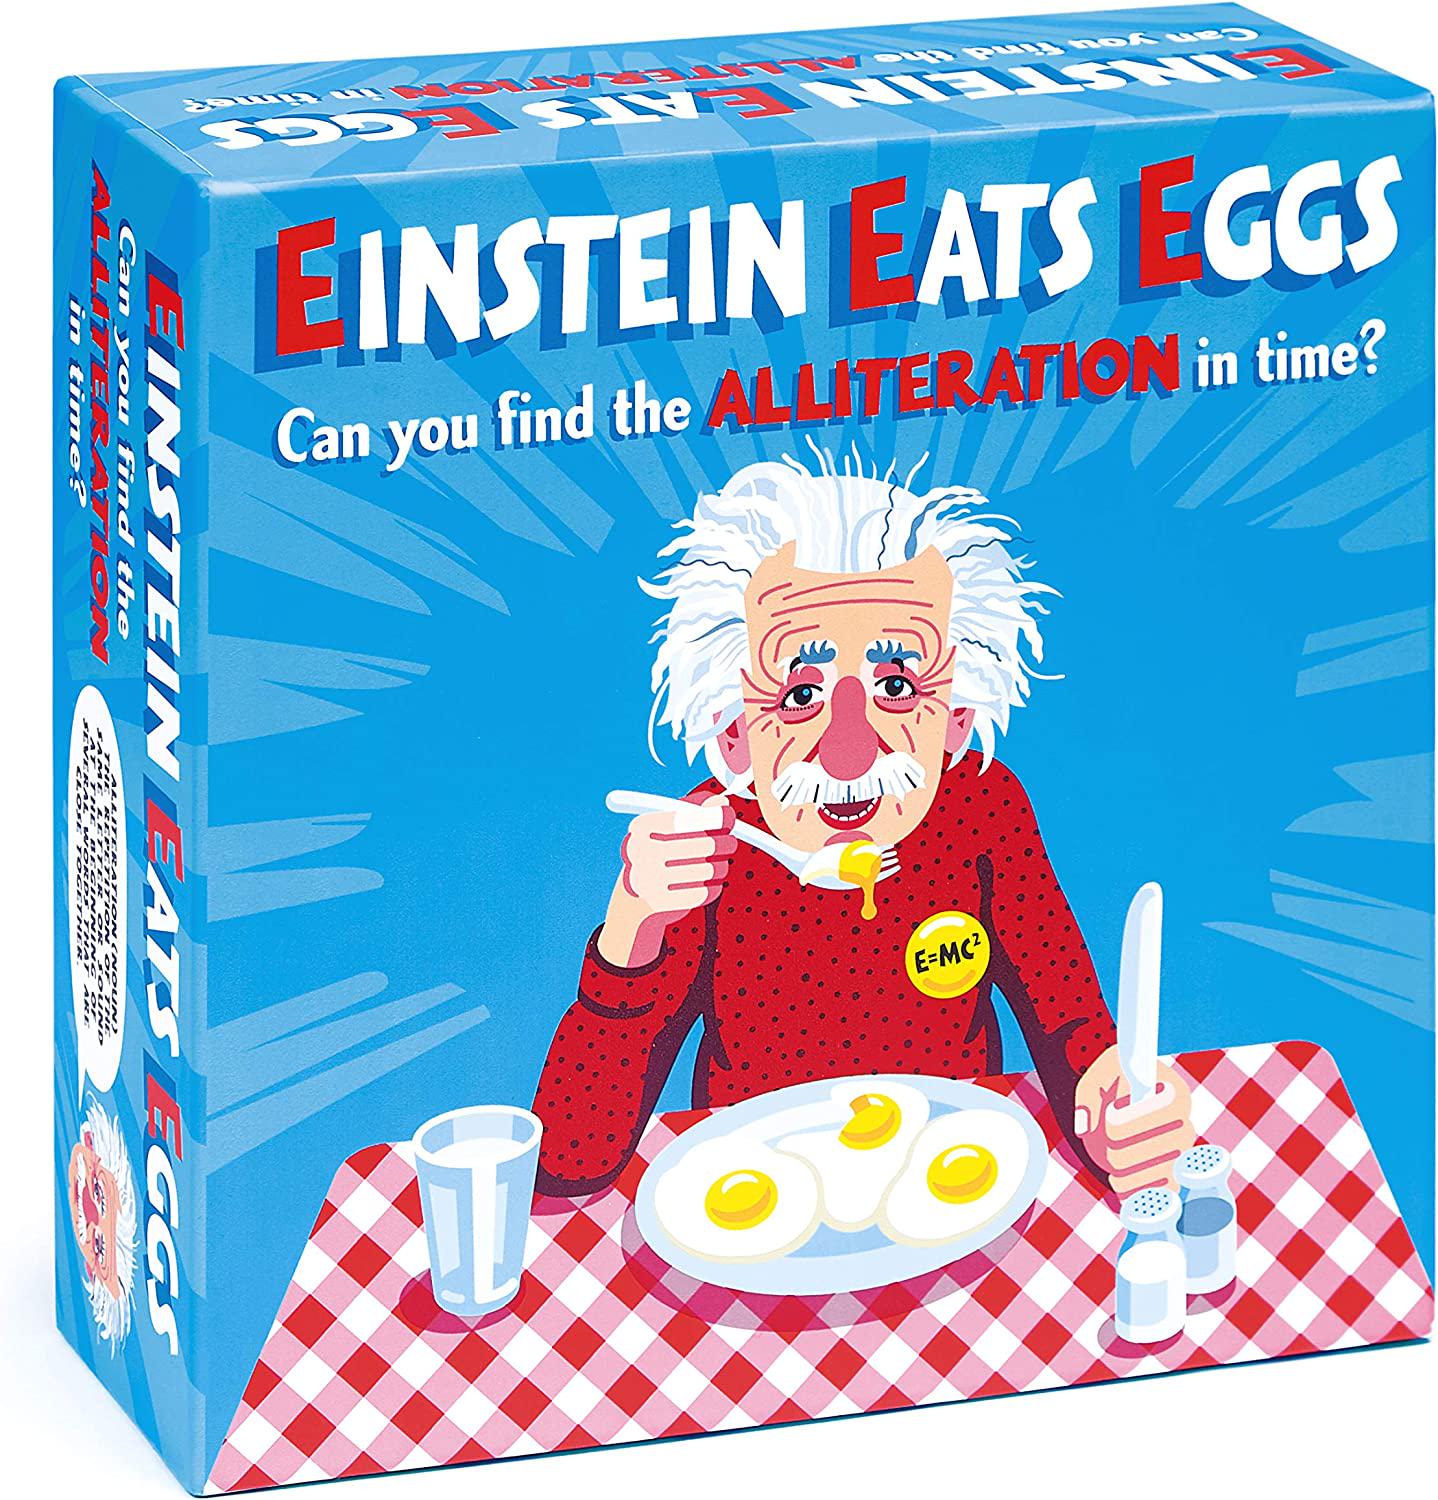 Clarendon Games, Einstein Eats Eggs: The Hilarious Fast-Talking Charades Game of Quick Minds and Mouths that Gets the Whole Family Laughing Party Games for Adults, Teens, Kids.